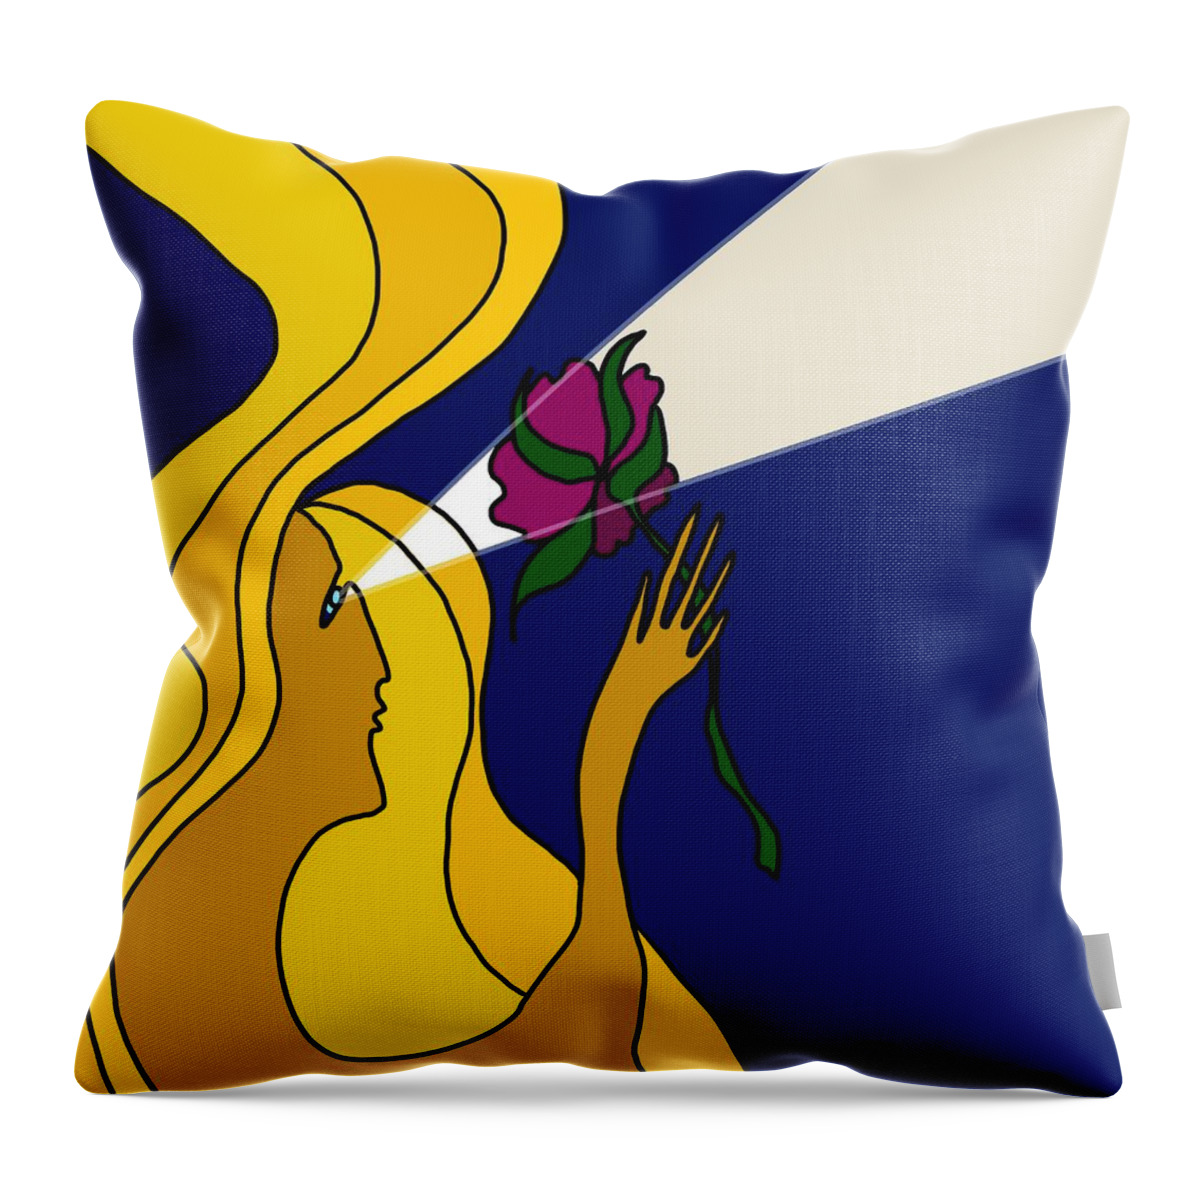 Woman Throw Pillow featuring the digital art Night Offering by Jeffrey Quiros